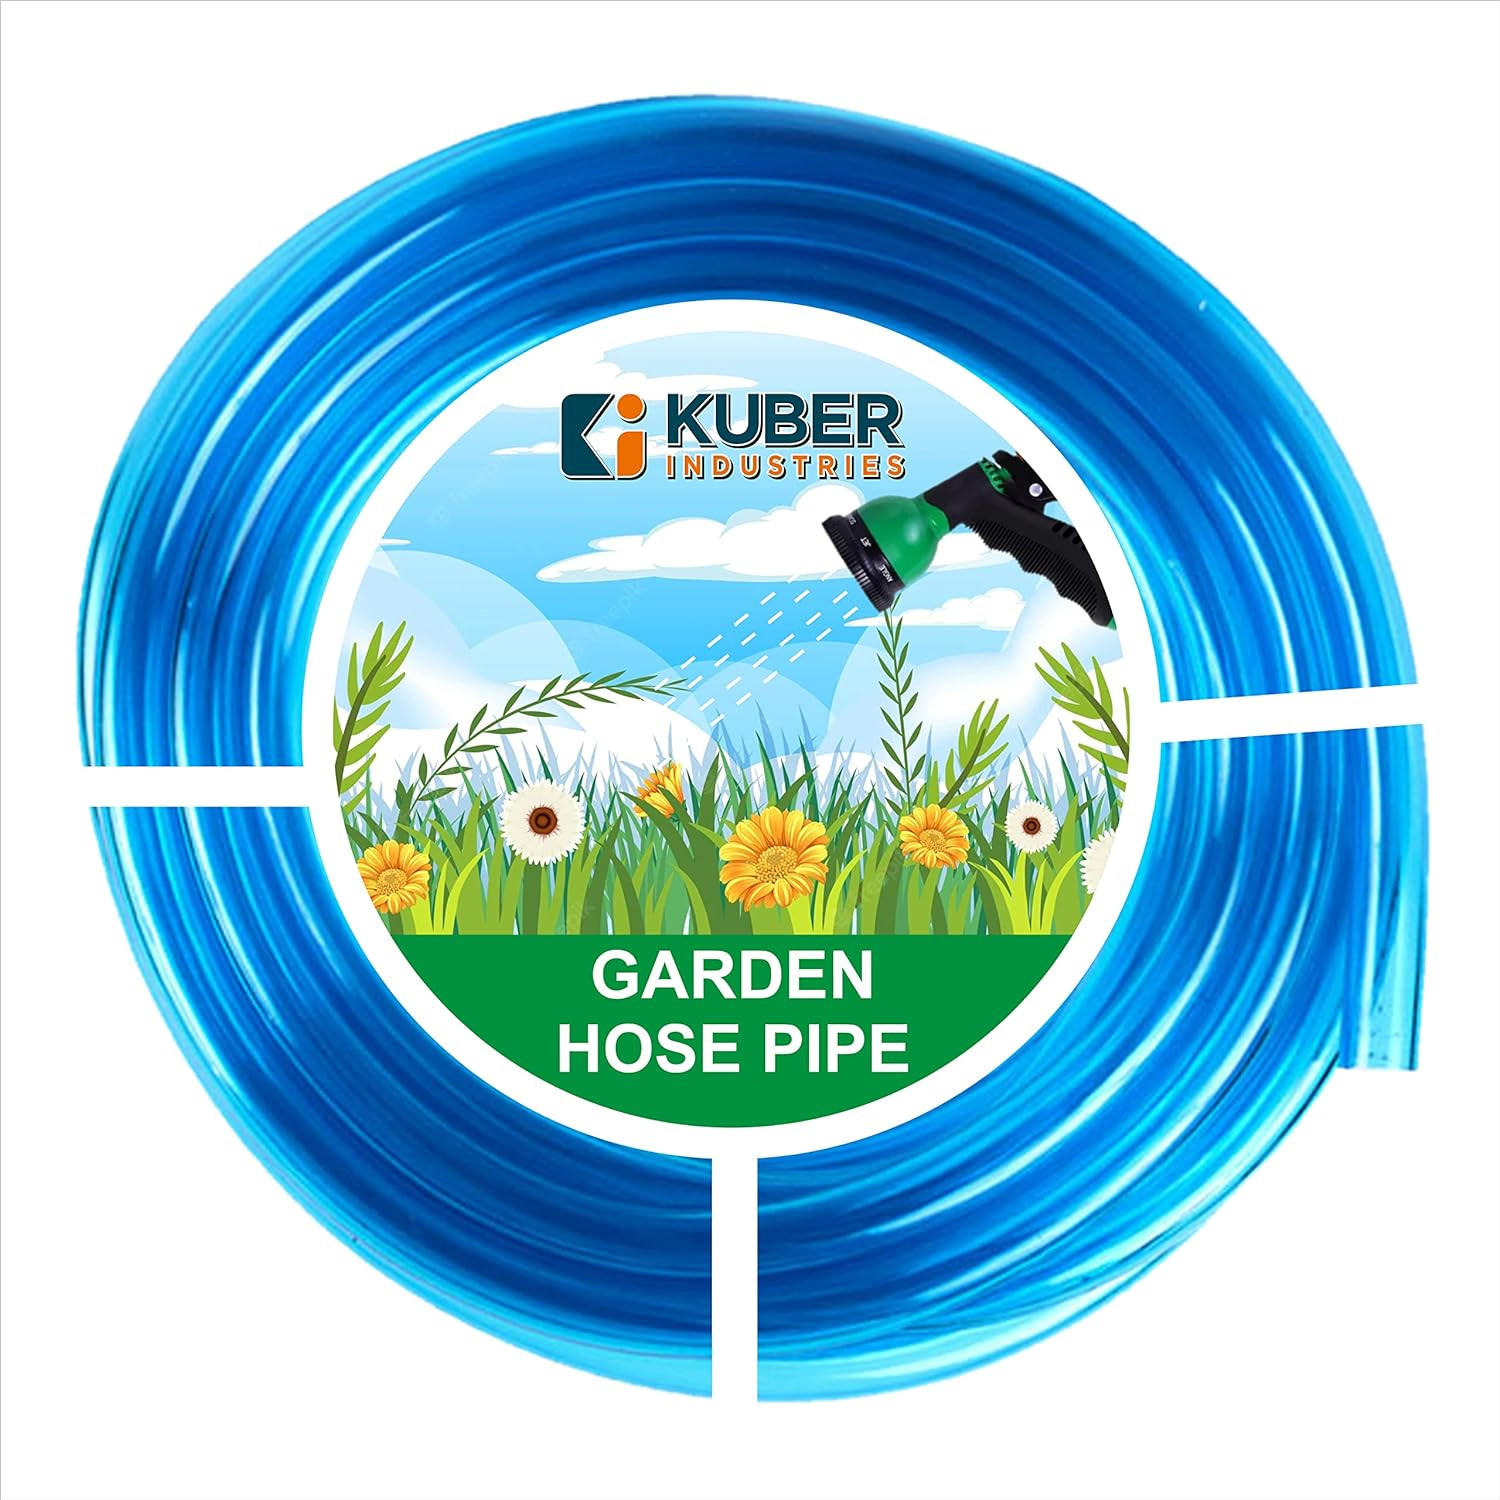 Kuber Industries Multiutility PVC Water Pipe | Multi-Utility Water Pipe for Garden, Car Cleaning & Pet Washing | Light Weight, Kink Proof Proof & Portable Hose Pipe for Gardening | 10 Meter | Blue |